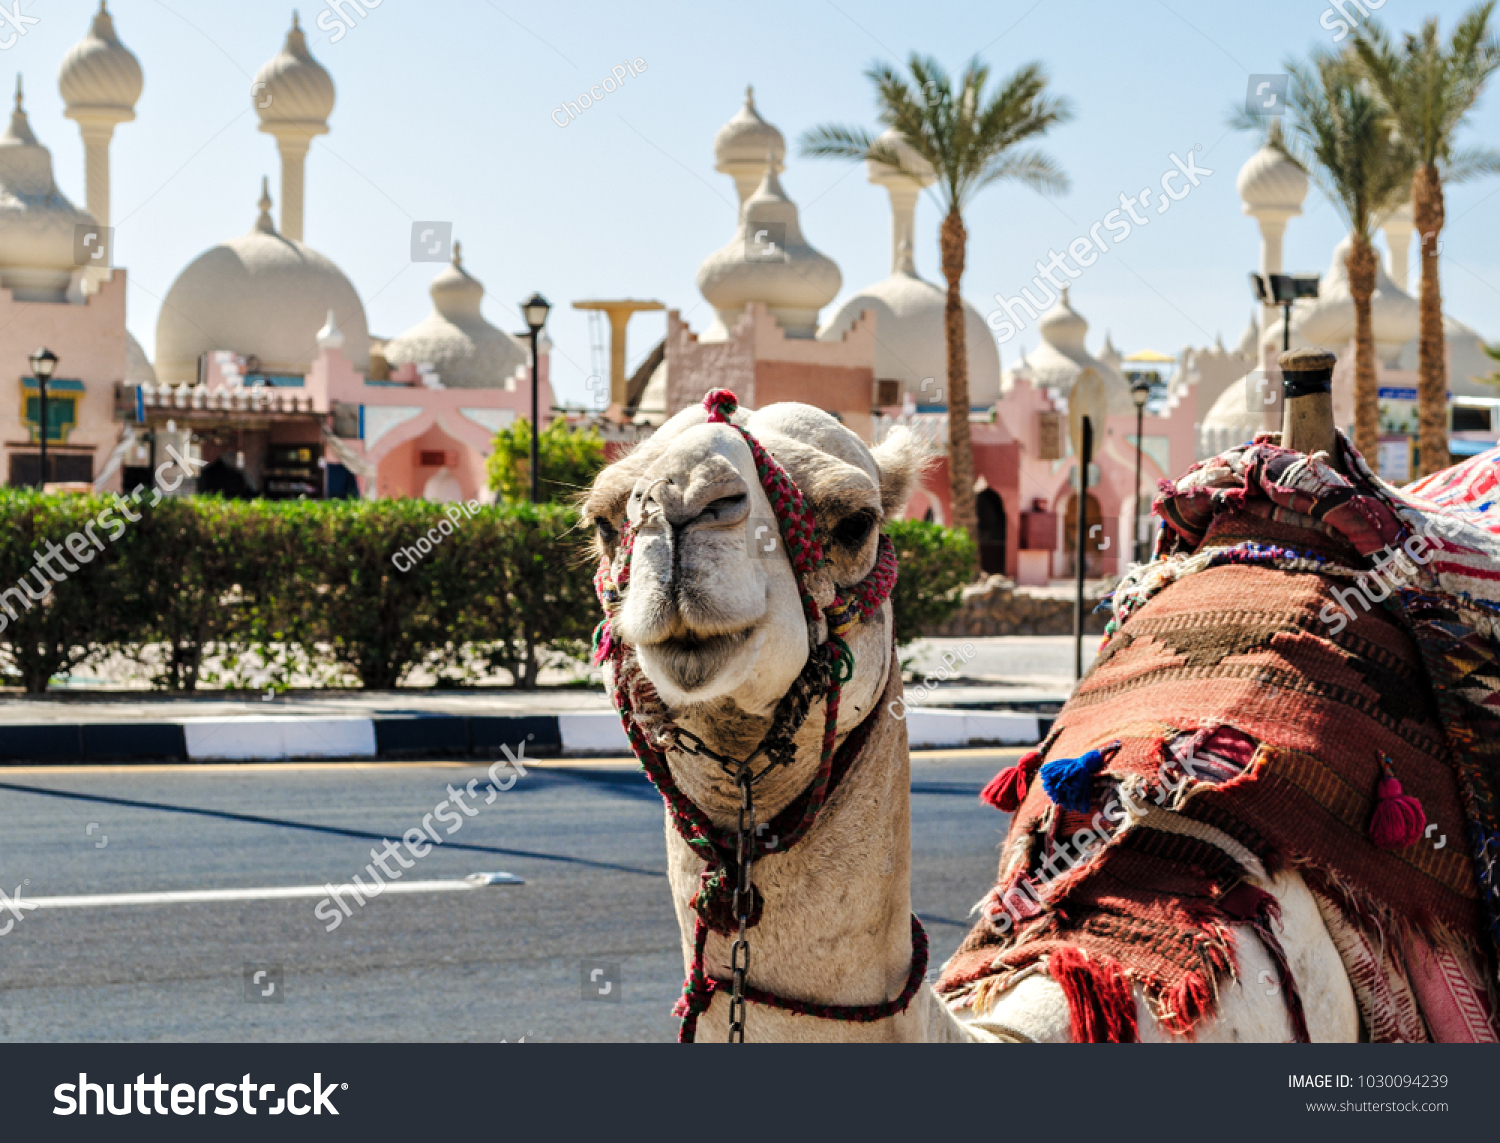 A riding camel in a bright blanket on the sunny street of Sharm El Sheikh #1030094239